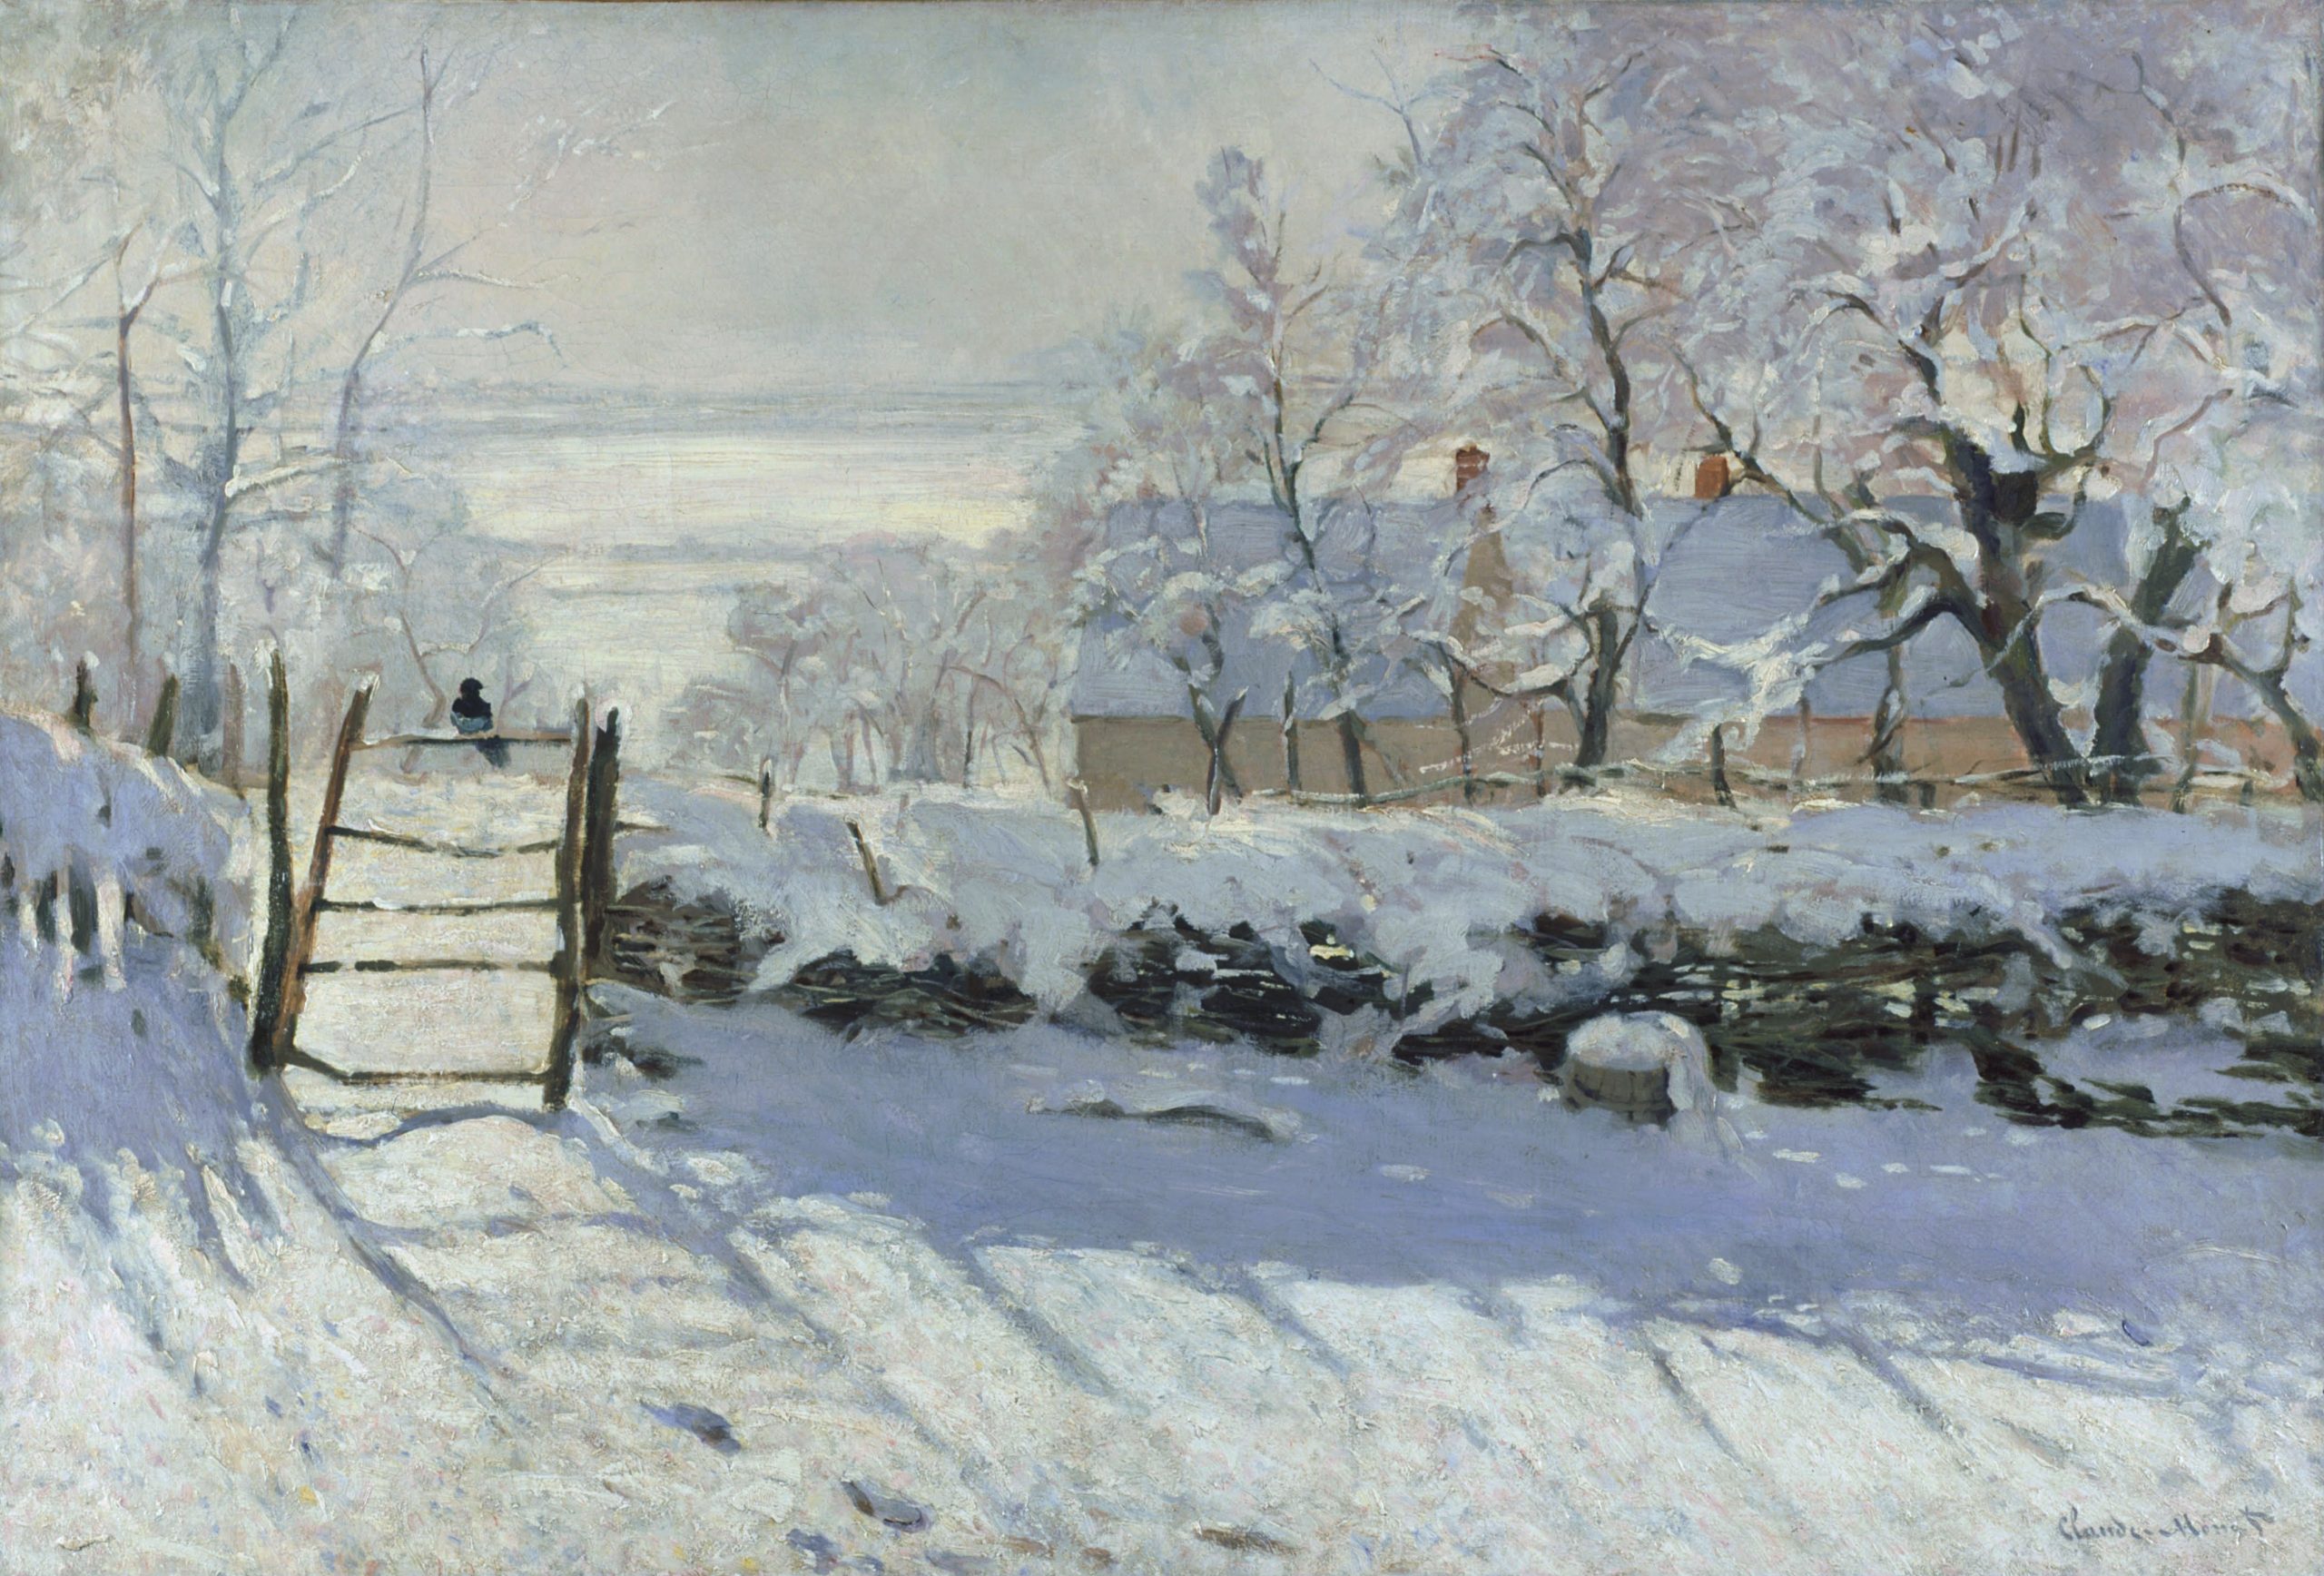 Was Winter Monet’s Favorite Season? Here Are 3 Surprising Facts About His Snowy Masterpiece ‘The Magpie’